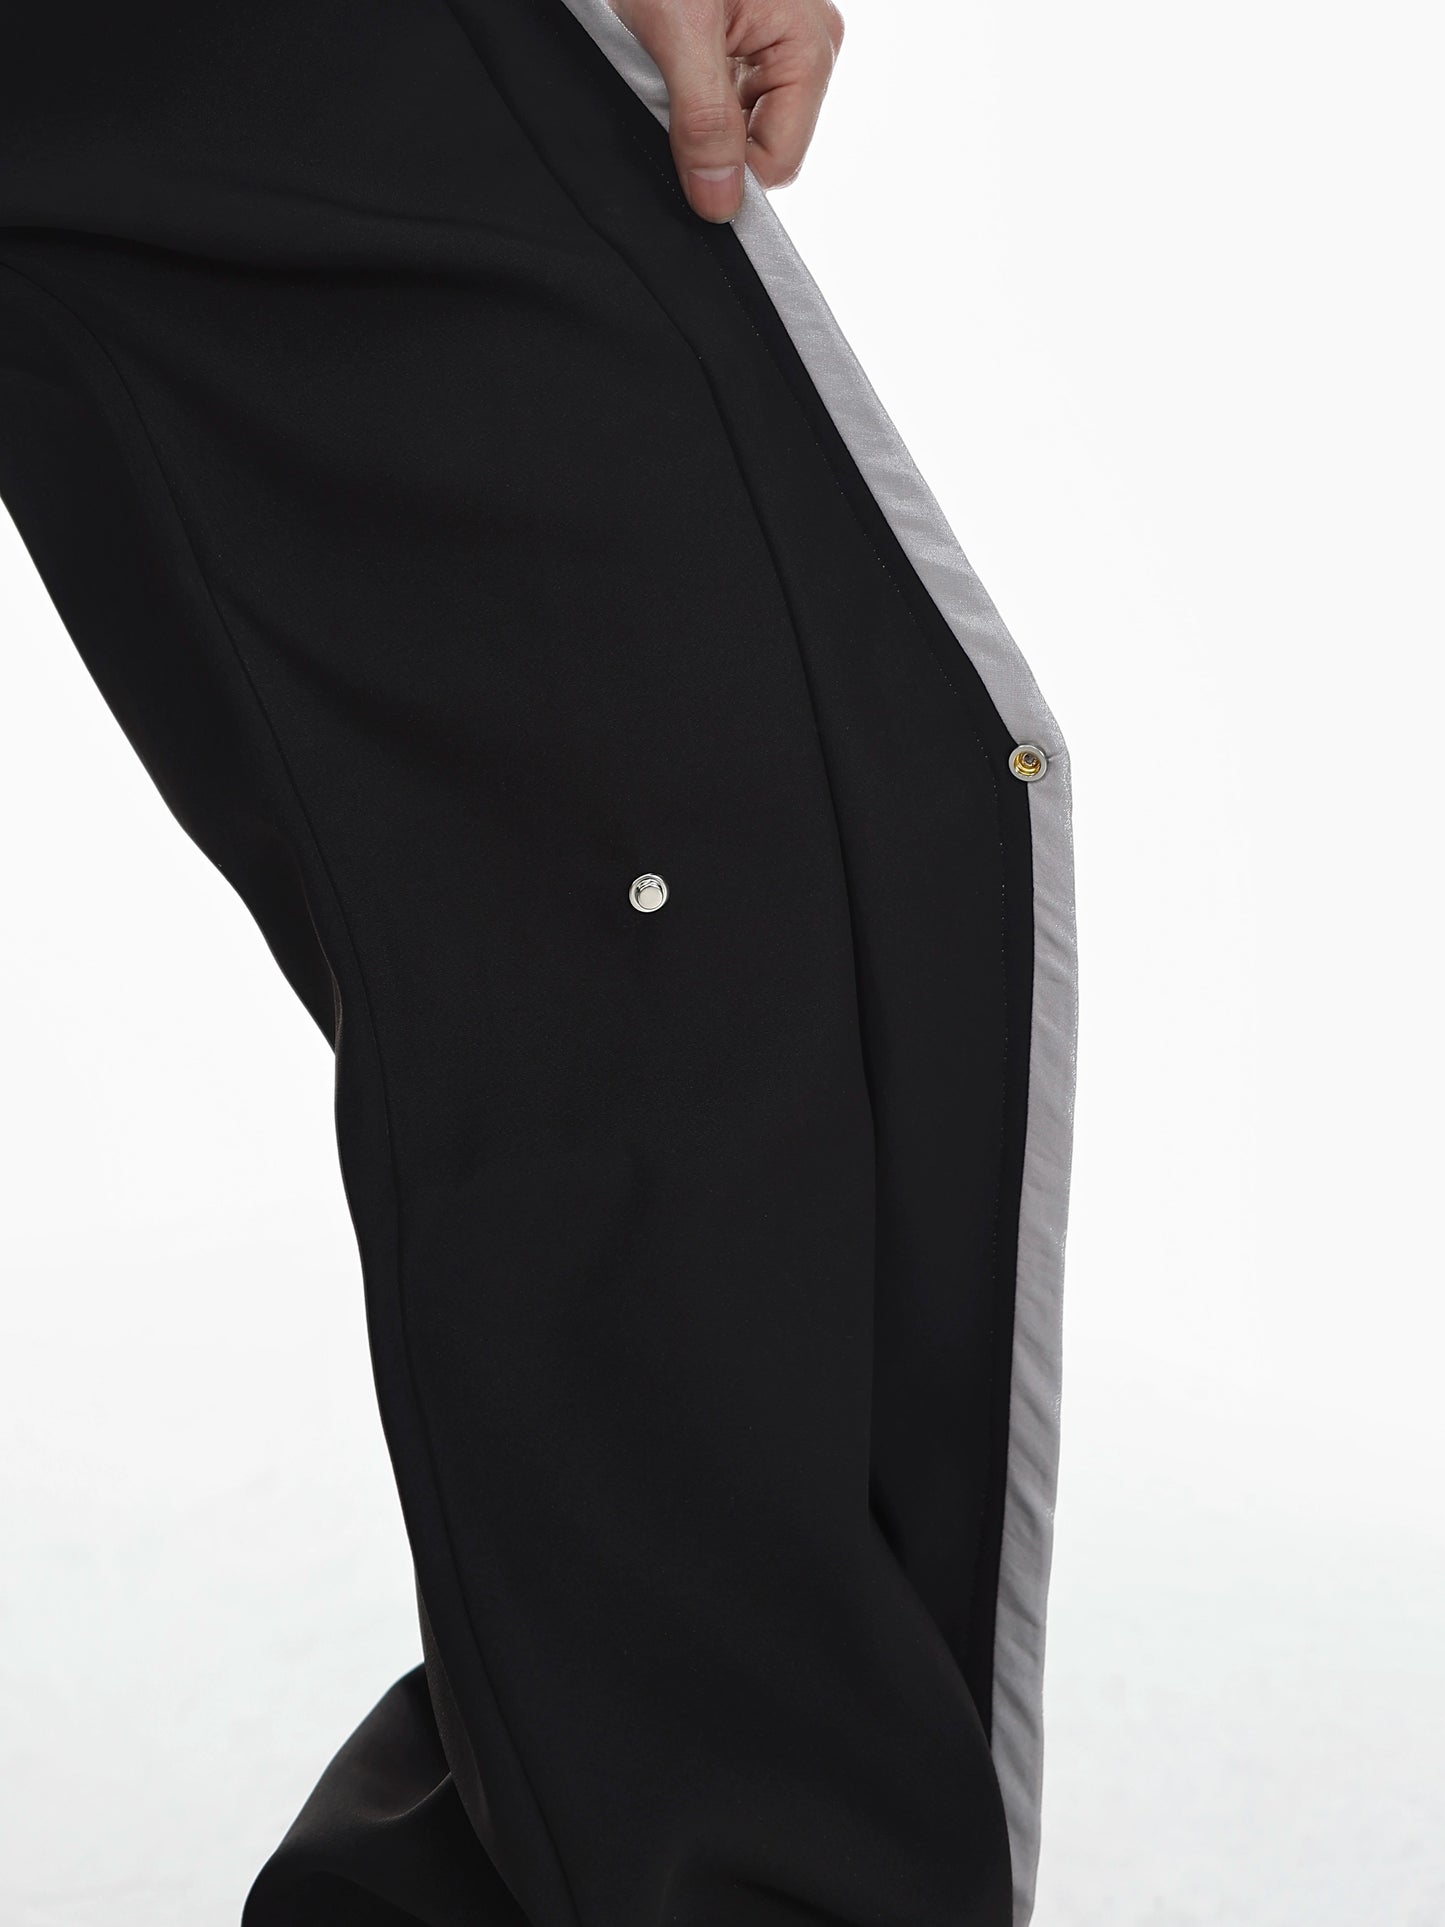 CulturE niche three-dimensional line design trousers metal button casual micro boot pants simple high-end trousers